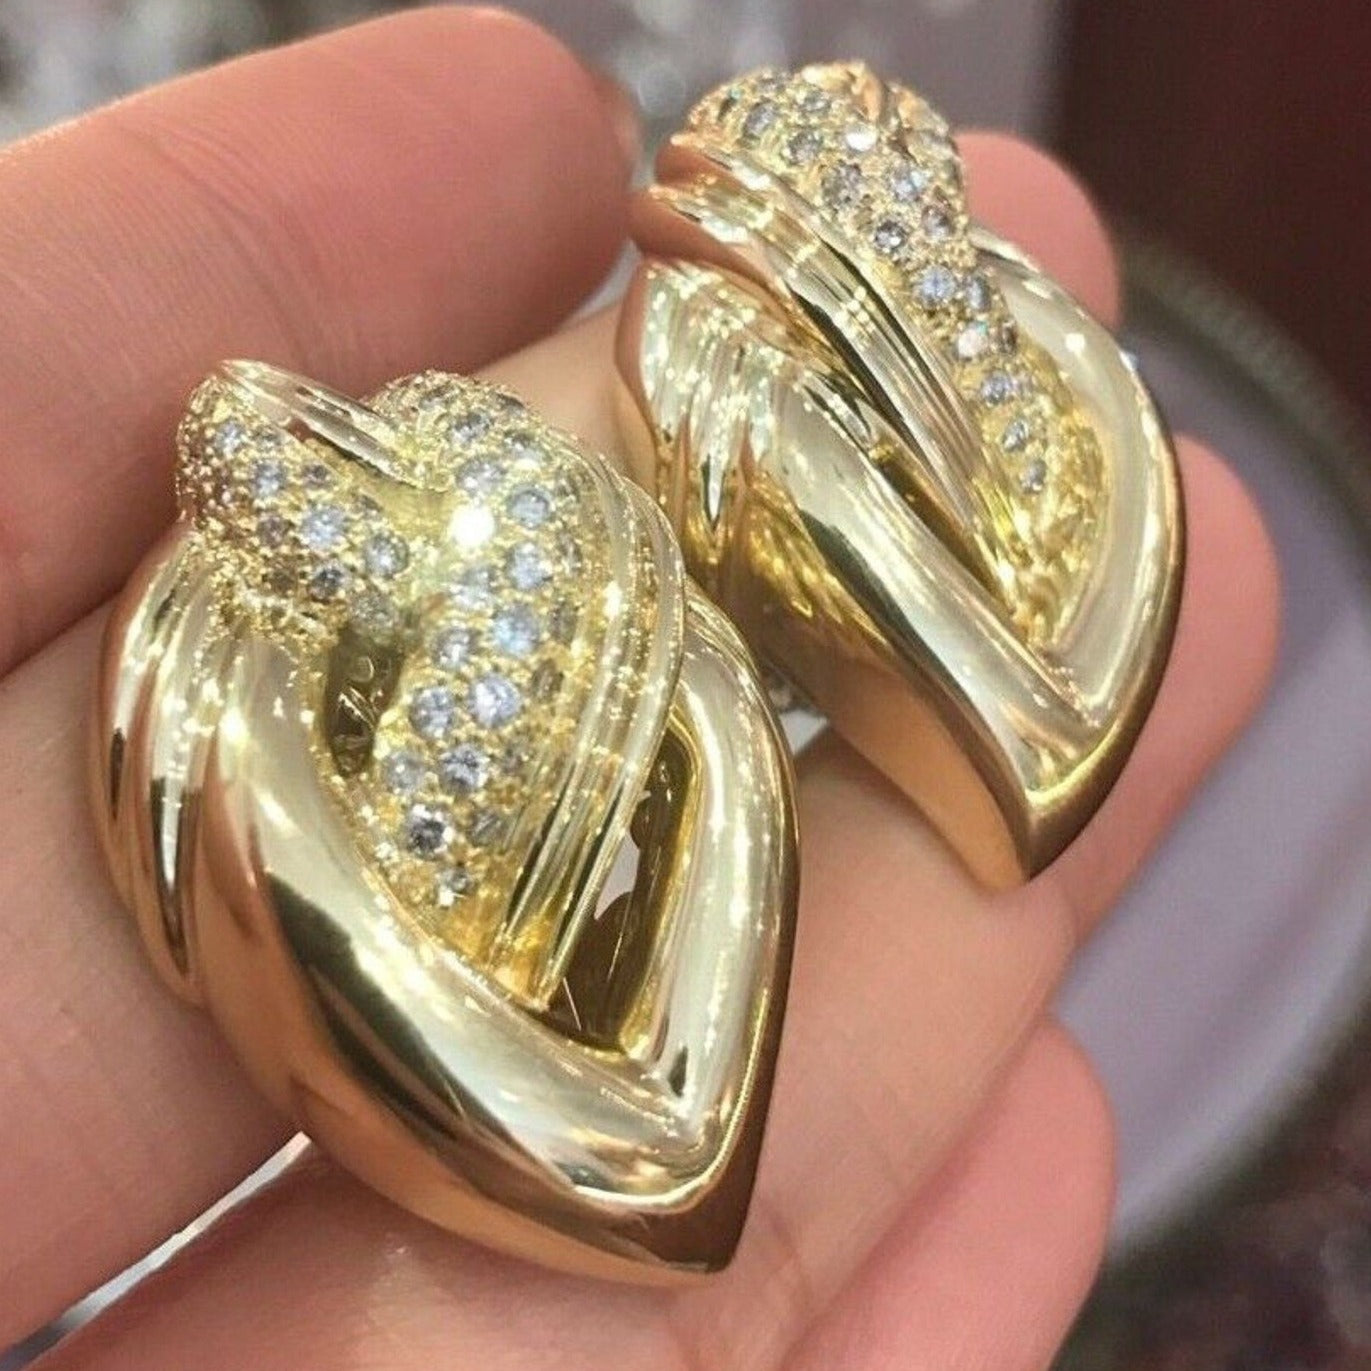 2.00 carat Large Pave Diamond Knot Earrings in 18K Yellow Gold